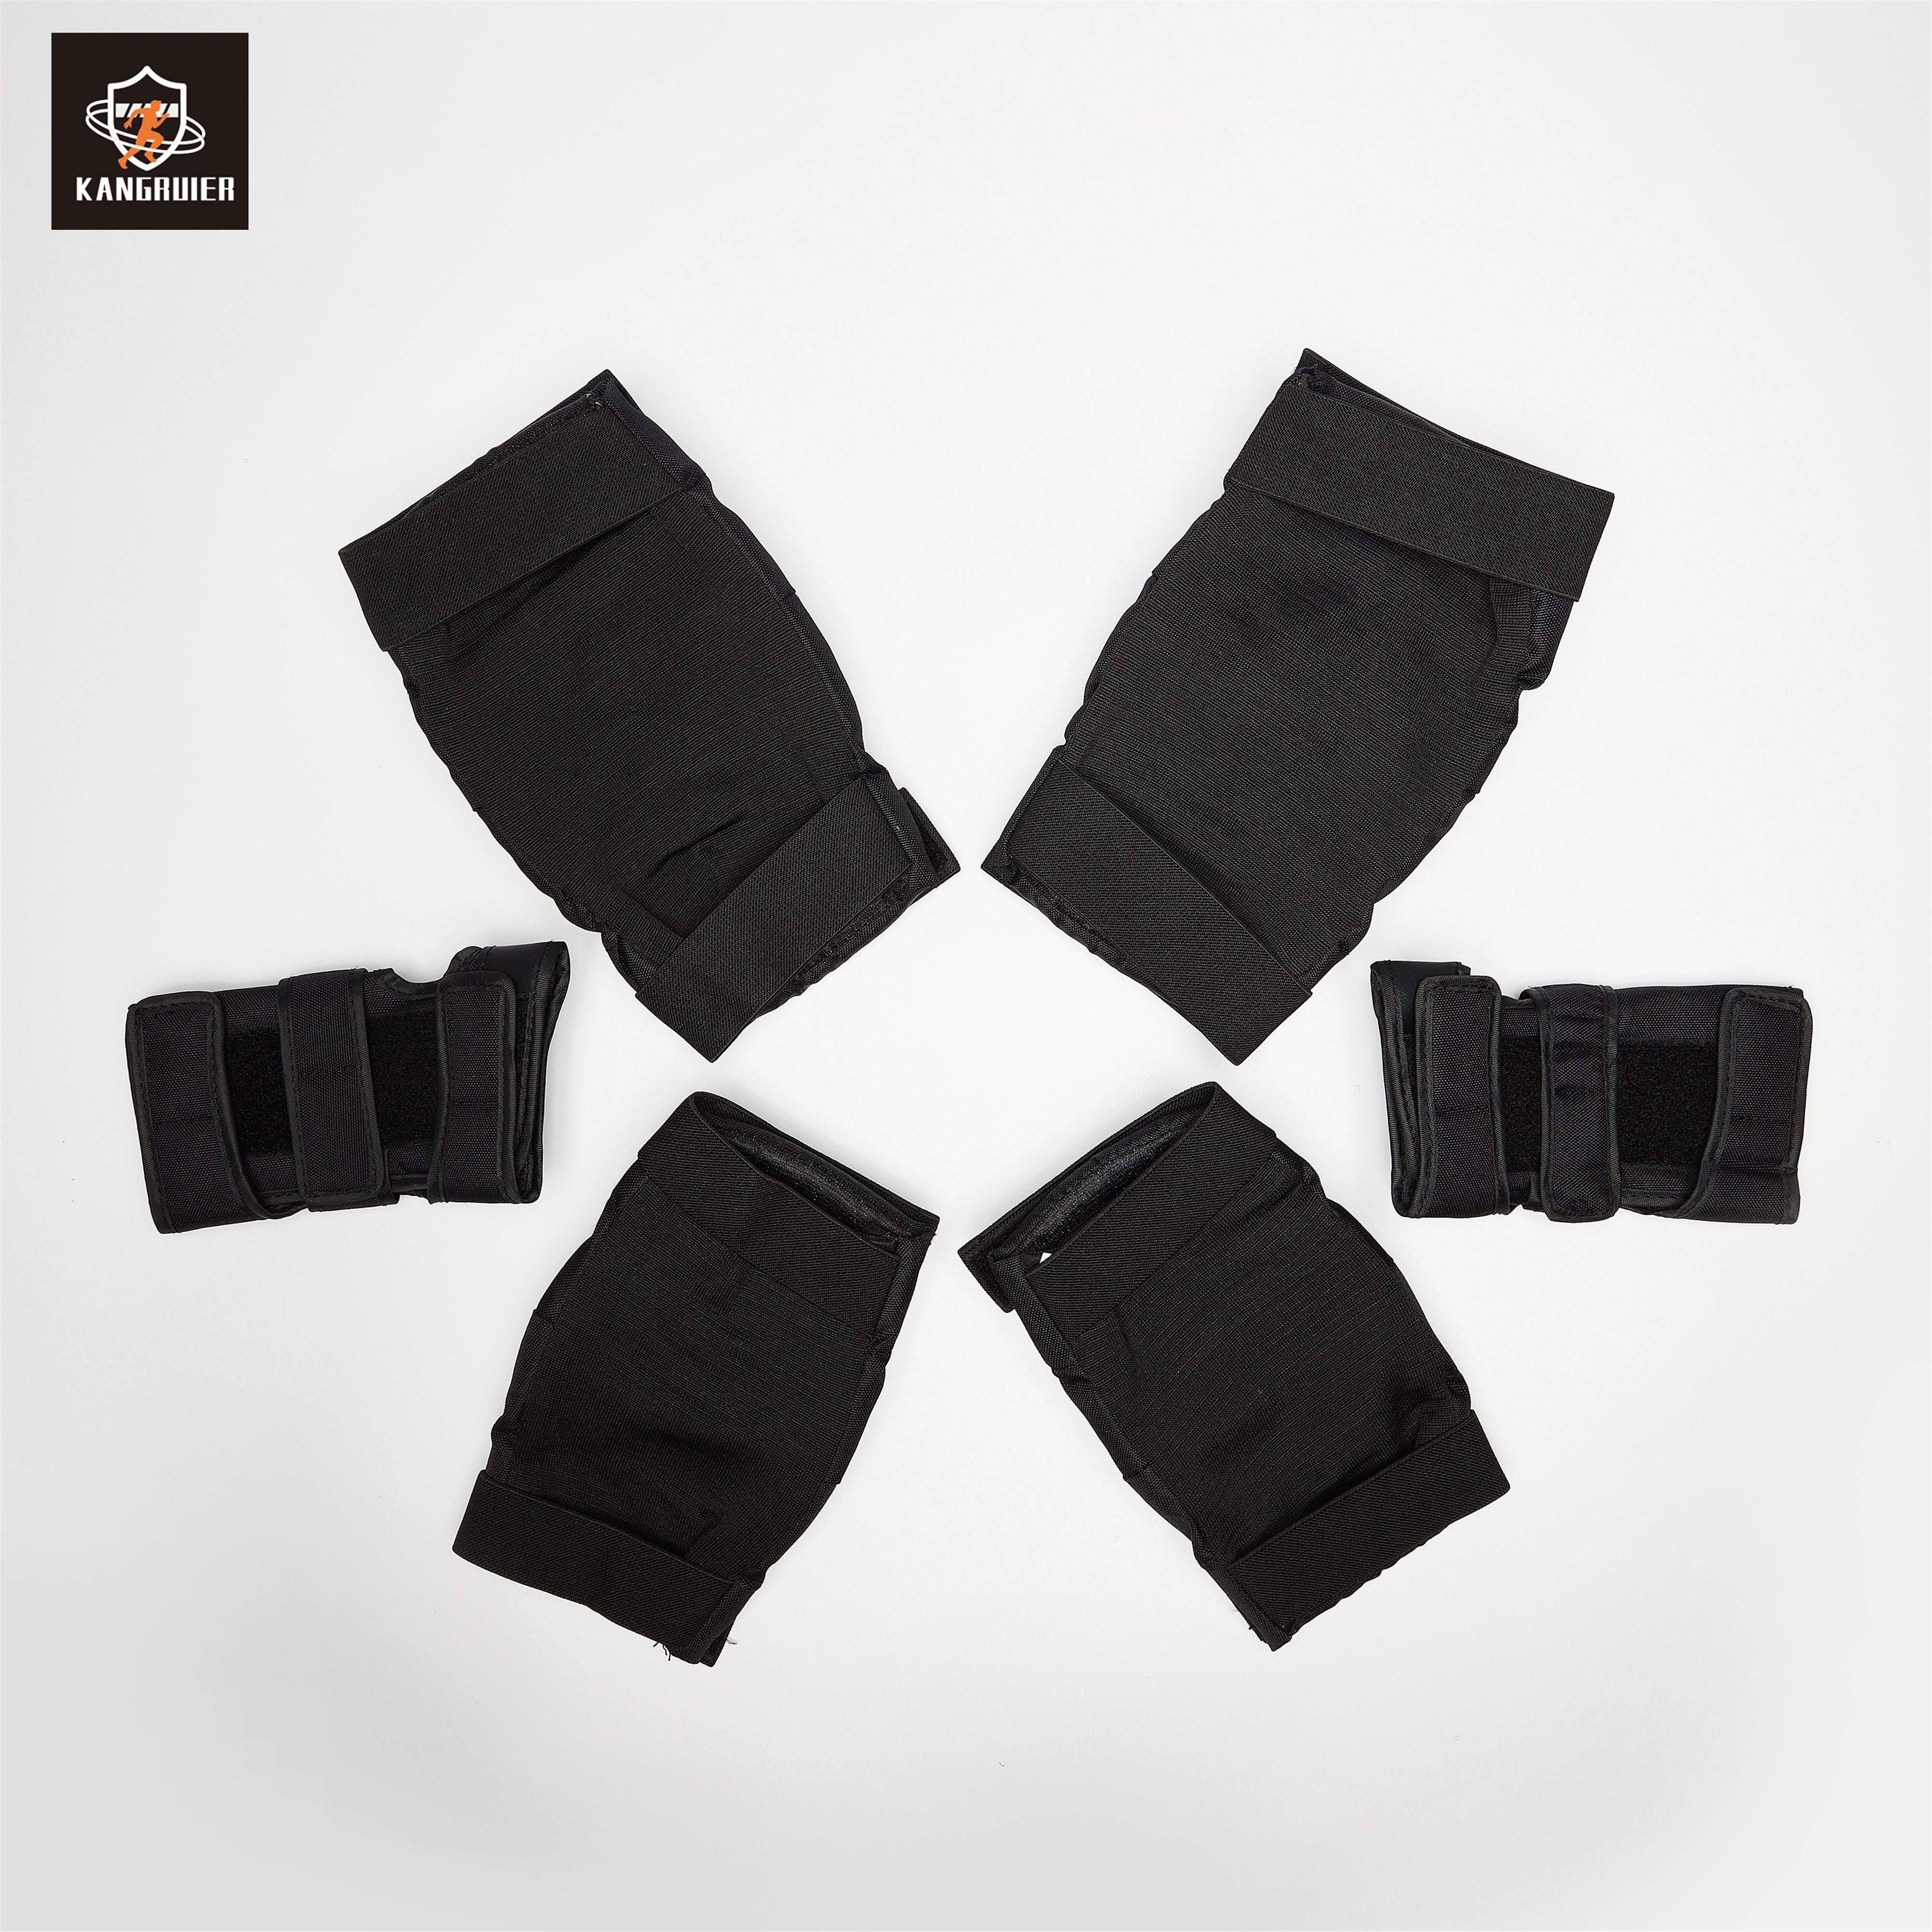 Knee and Elbow Pads & Wrist Guards for Multi Sports Protection